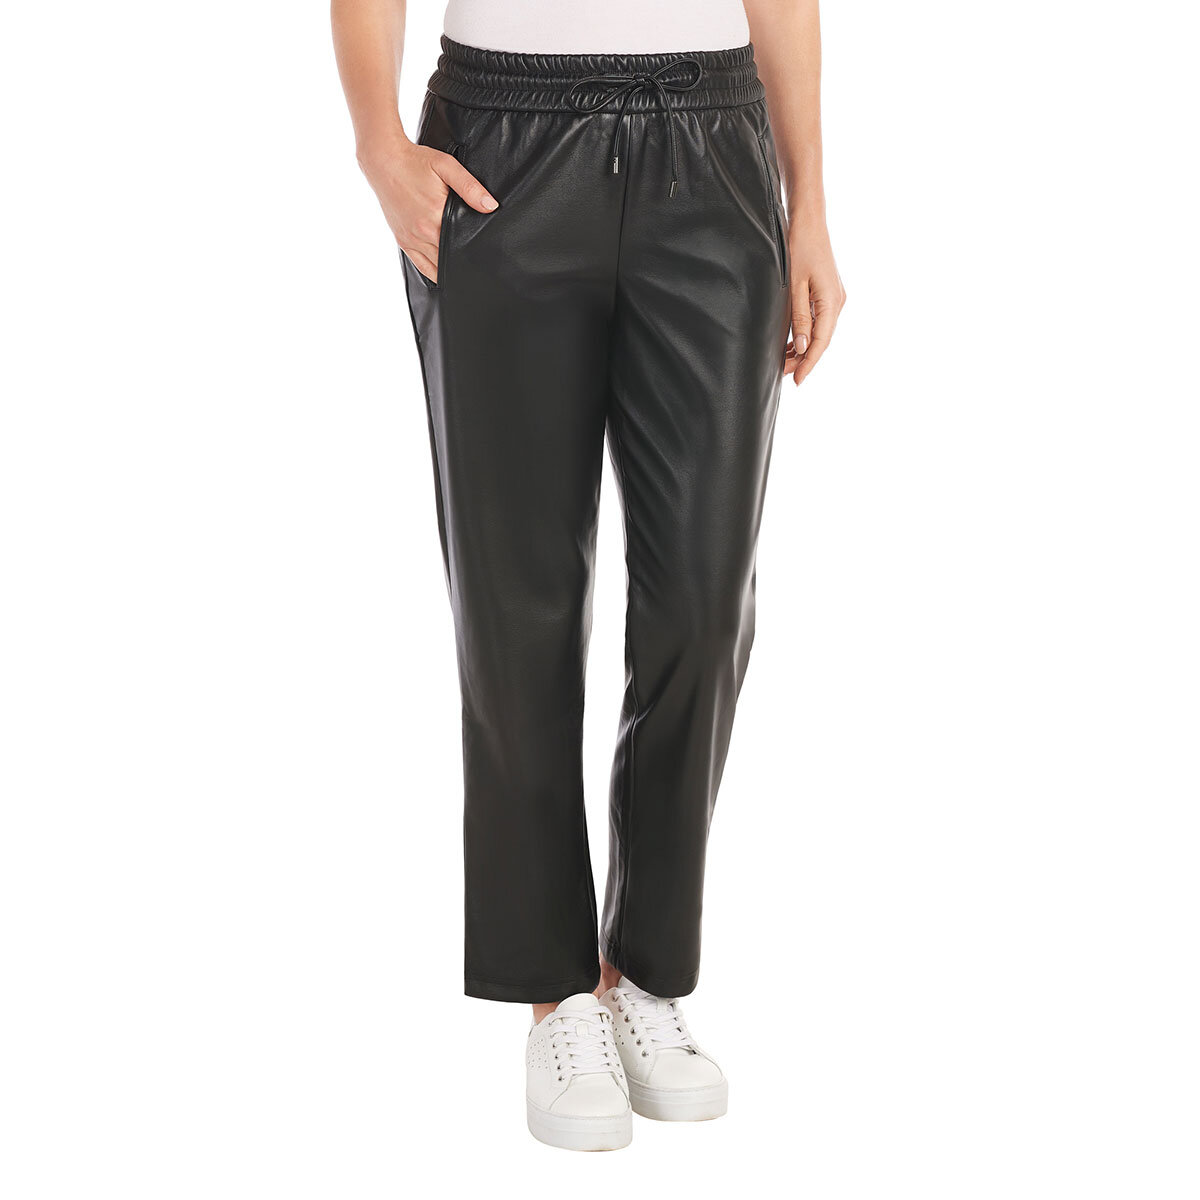 Hilary Radley Faux Leather Pant in Black